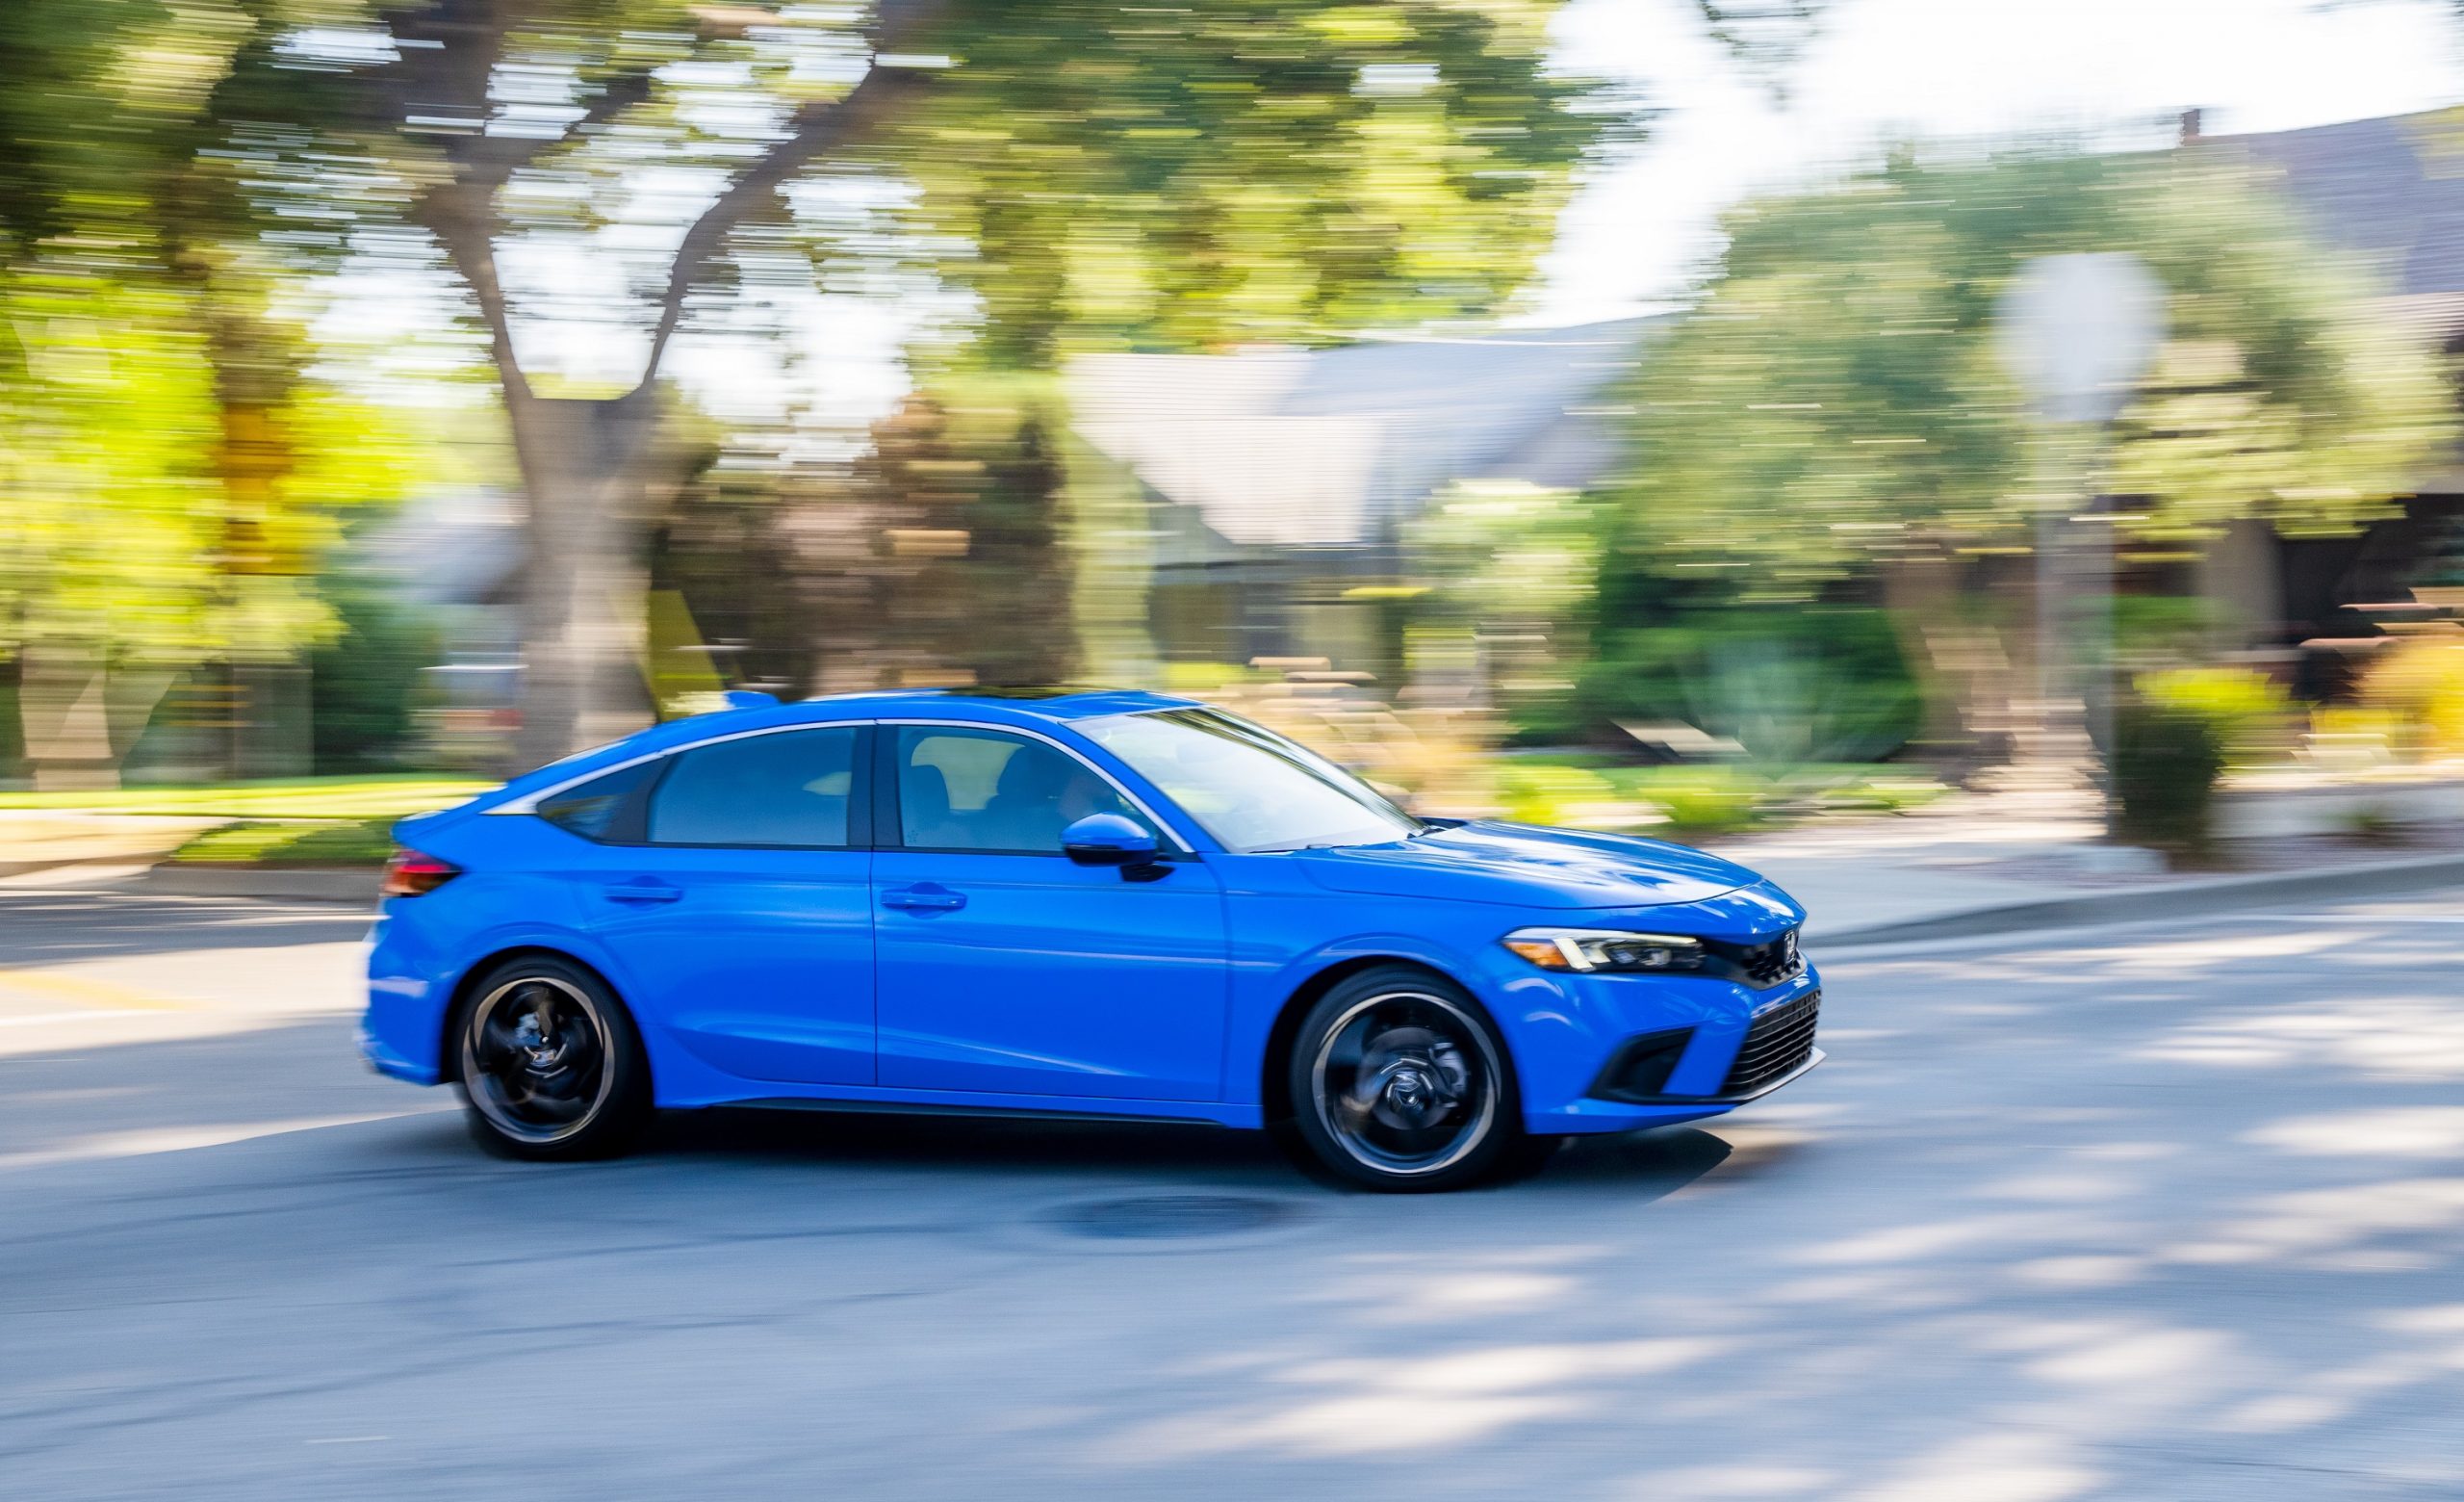 A blue 2022 Honda Civic compact sedan shot in motion from profile